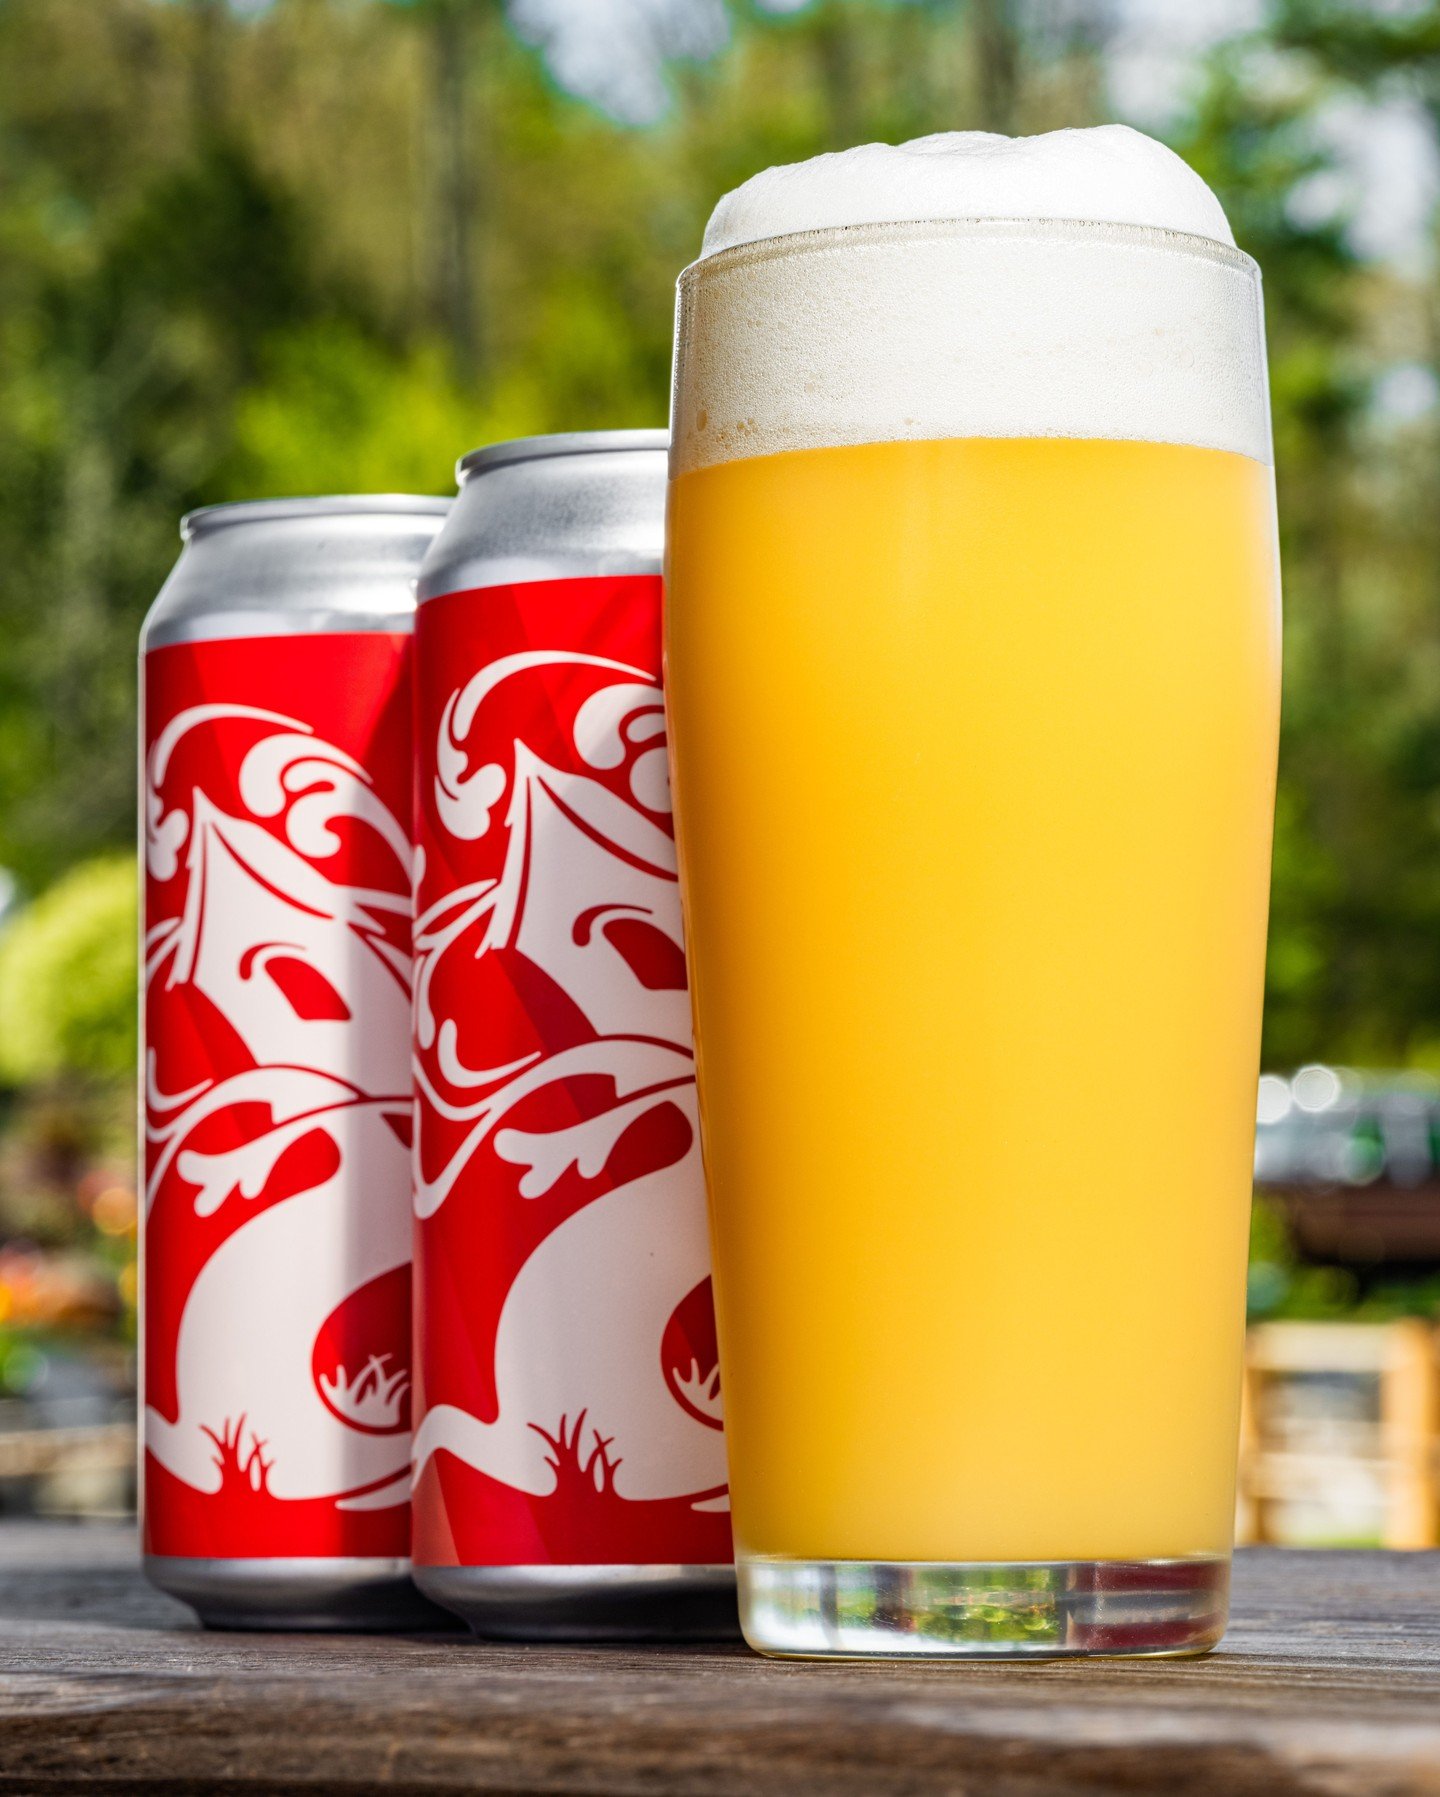 Fresh Peach was crafted to showcase the best and most fresh Citra, Nelson, and Peacharine that we have. We went to great lengths to get Nelson and Peacharine specifically in-house as close to harvest as possible to make this beer.

In addition to the